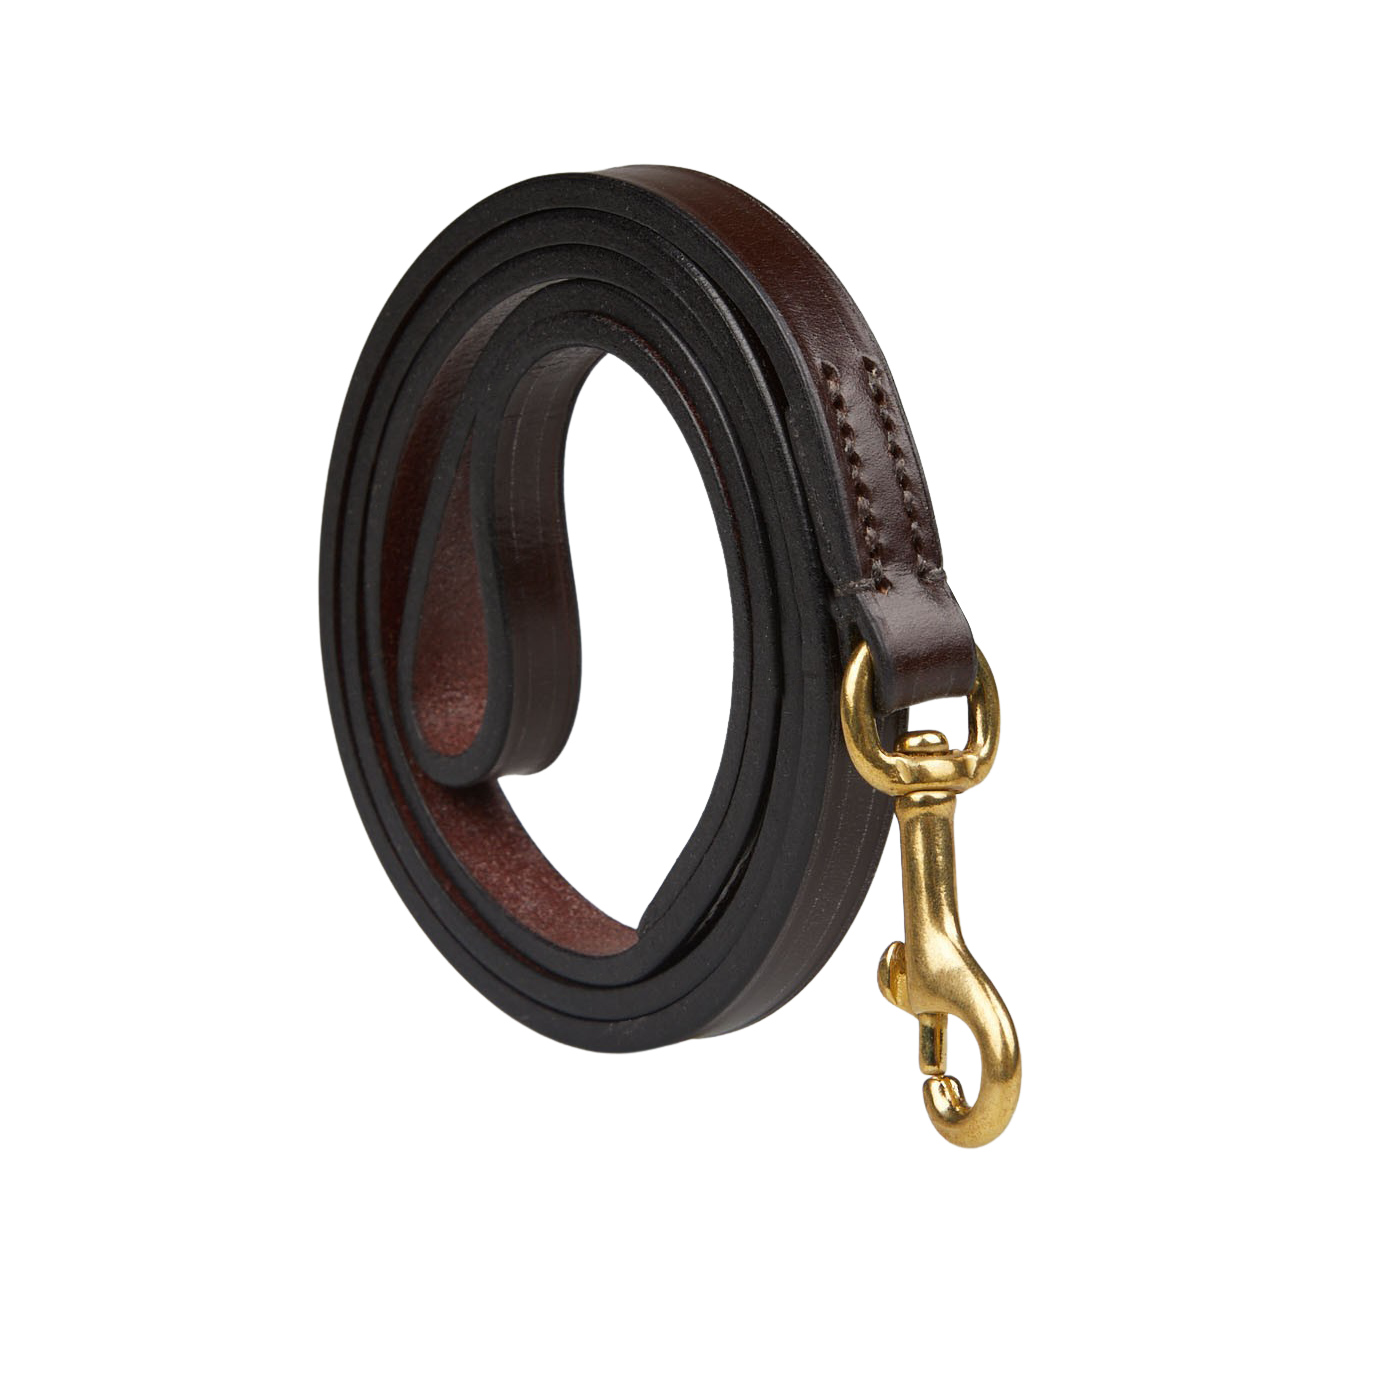 A Hardy & Parsons Dark Brown Saddle Leather Dog Leash with brass hardware.